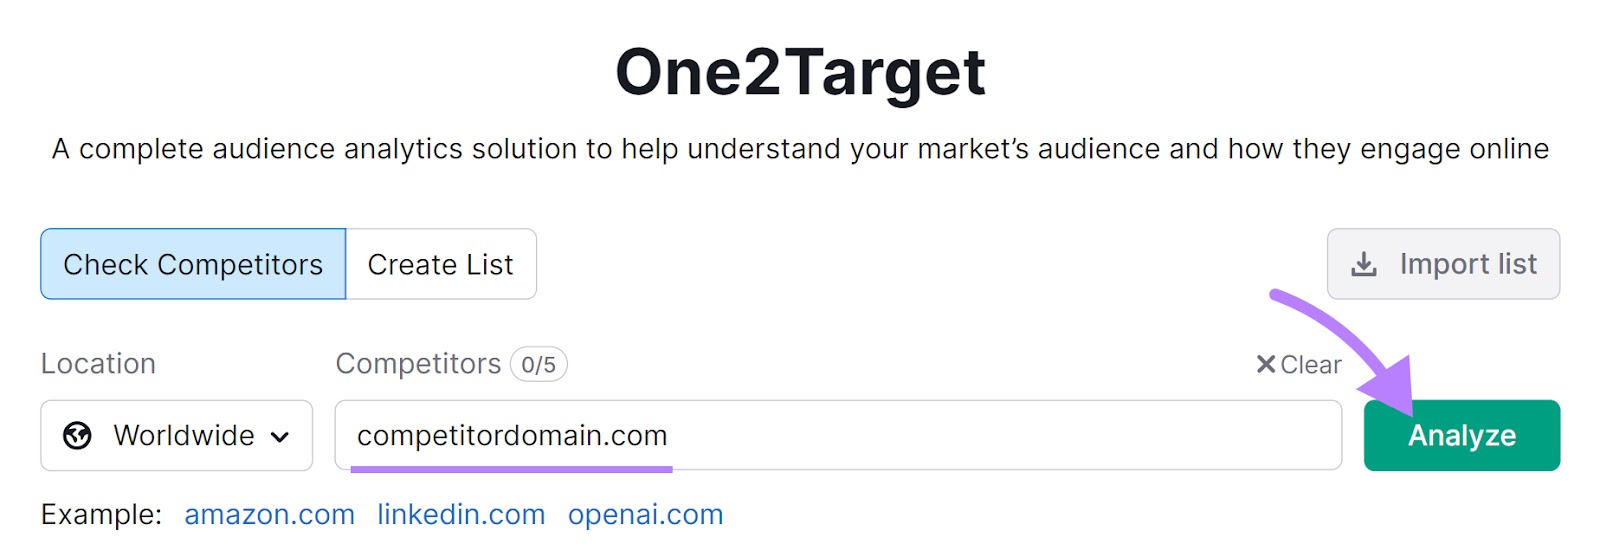 Enter competitors' domain to One2Target search bar